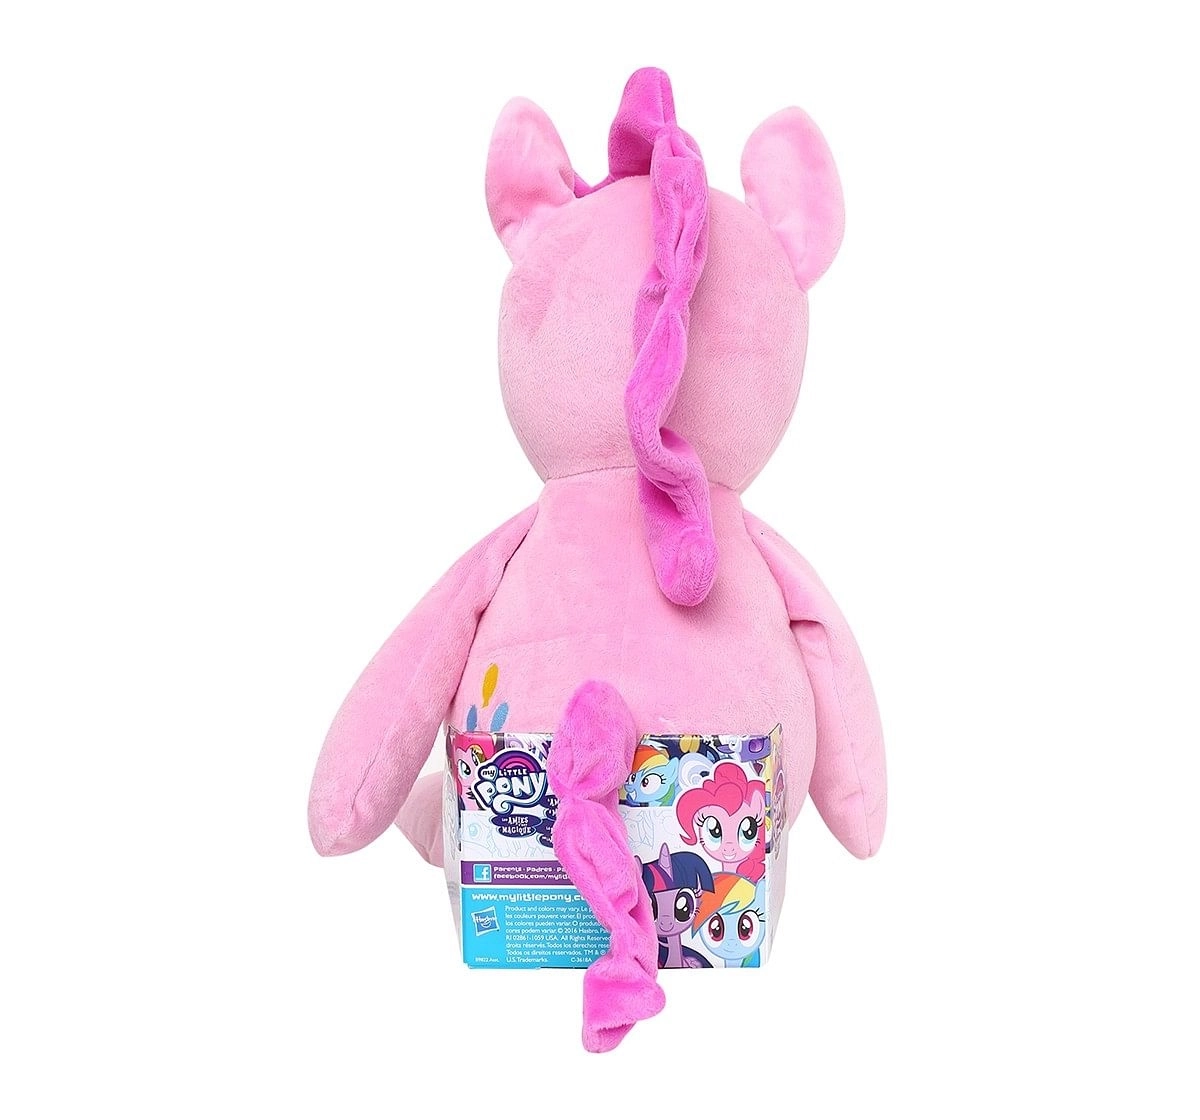  My Little Pony Friendship Is Magic Pinkie Pie Huggable Plush Character Soft Toys for Kids age 3Y+ - 30.5 Cm (Pink)